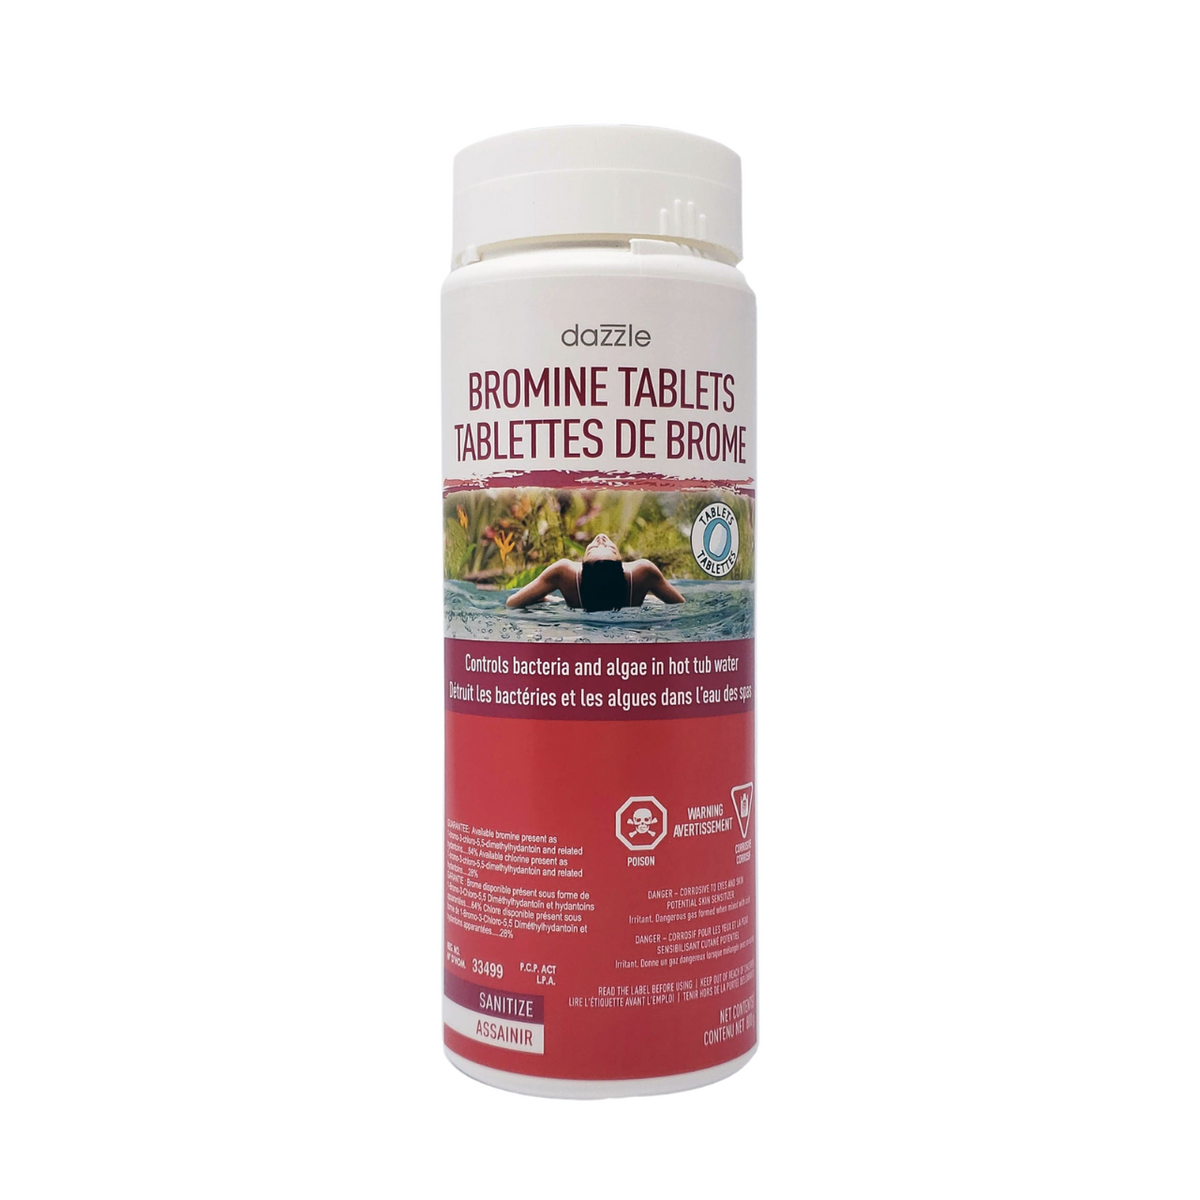 Dazzle™ Bromine Tablets - Controls bacteria and algae in hot tub water